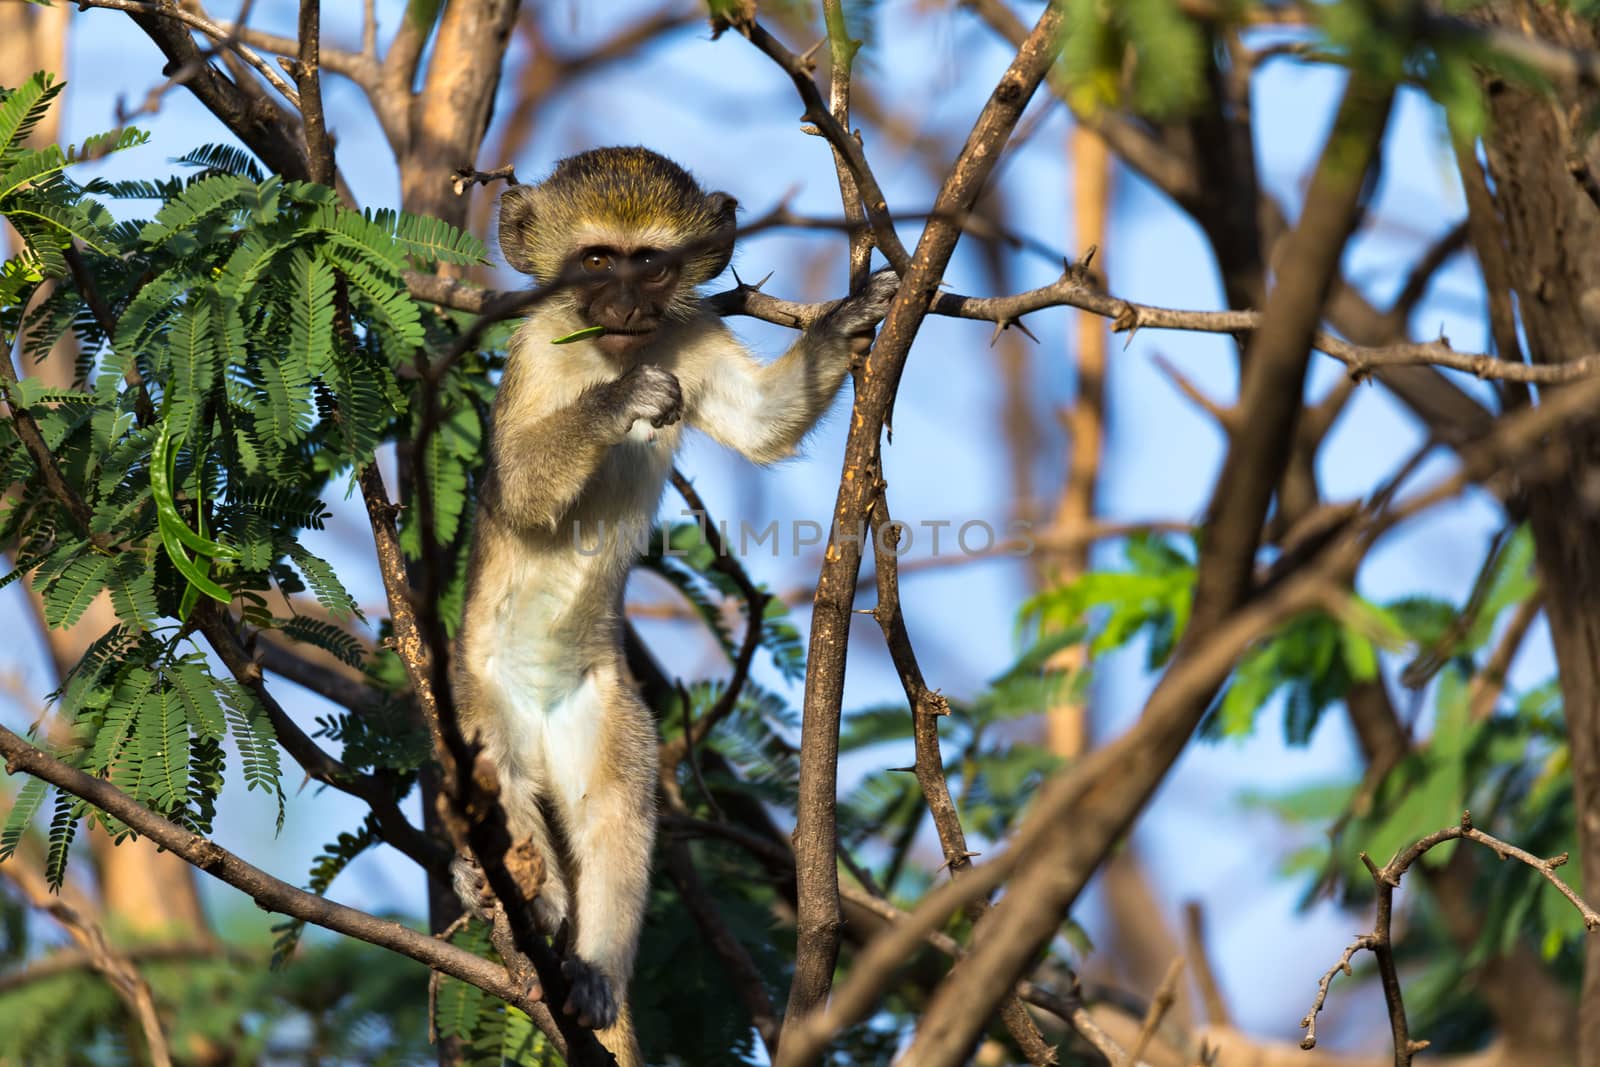 One monkey sits on the branch of a tree